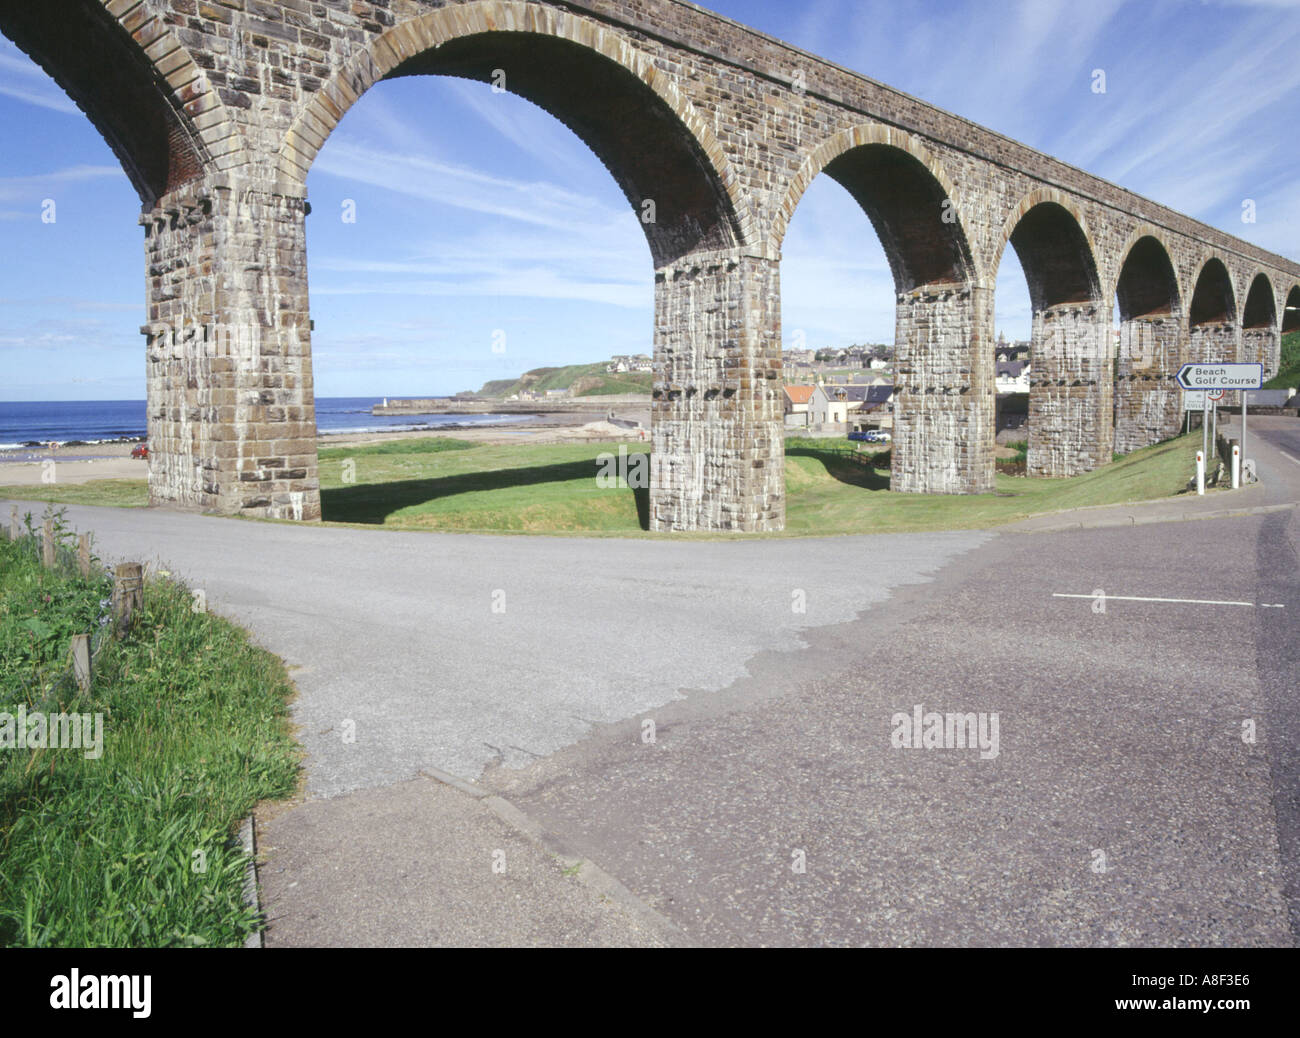 dh  CULLEN MORAY Scottish Viaduct Cullen Bay and town scotland footpath bridge arches Stock Photo